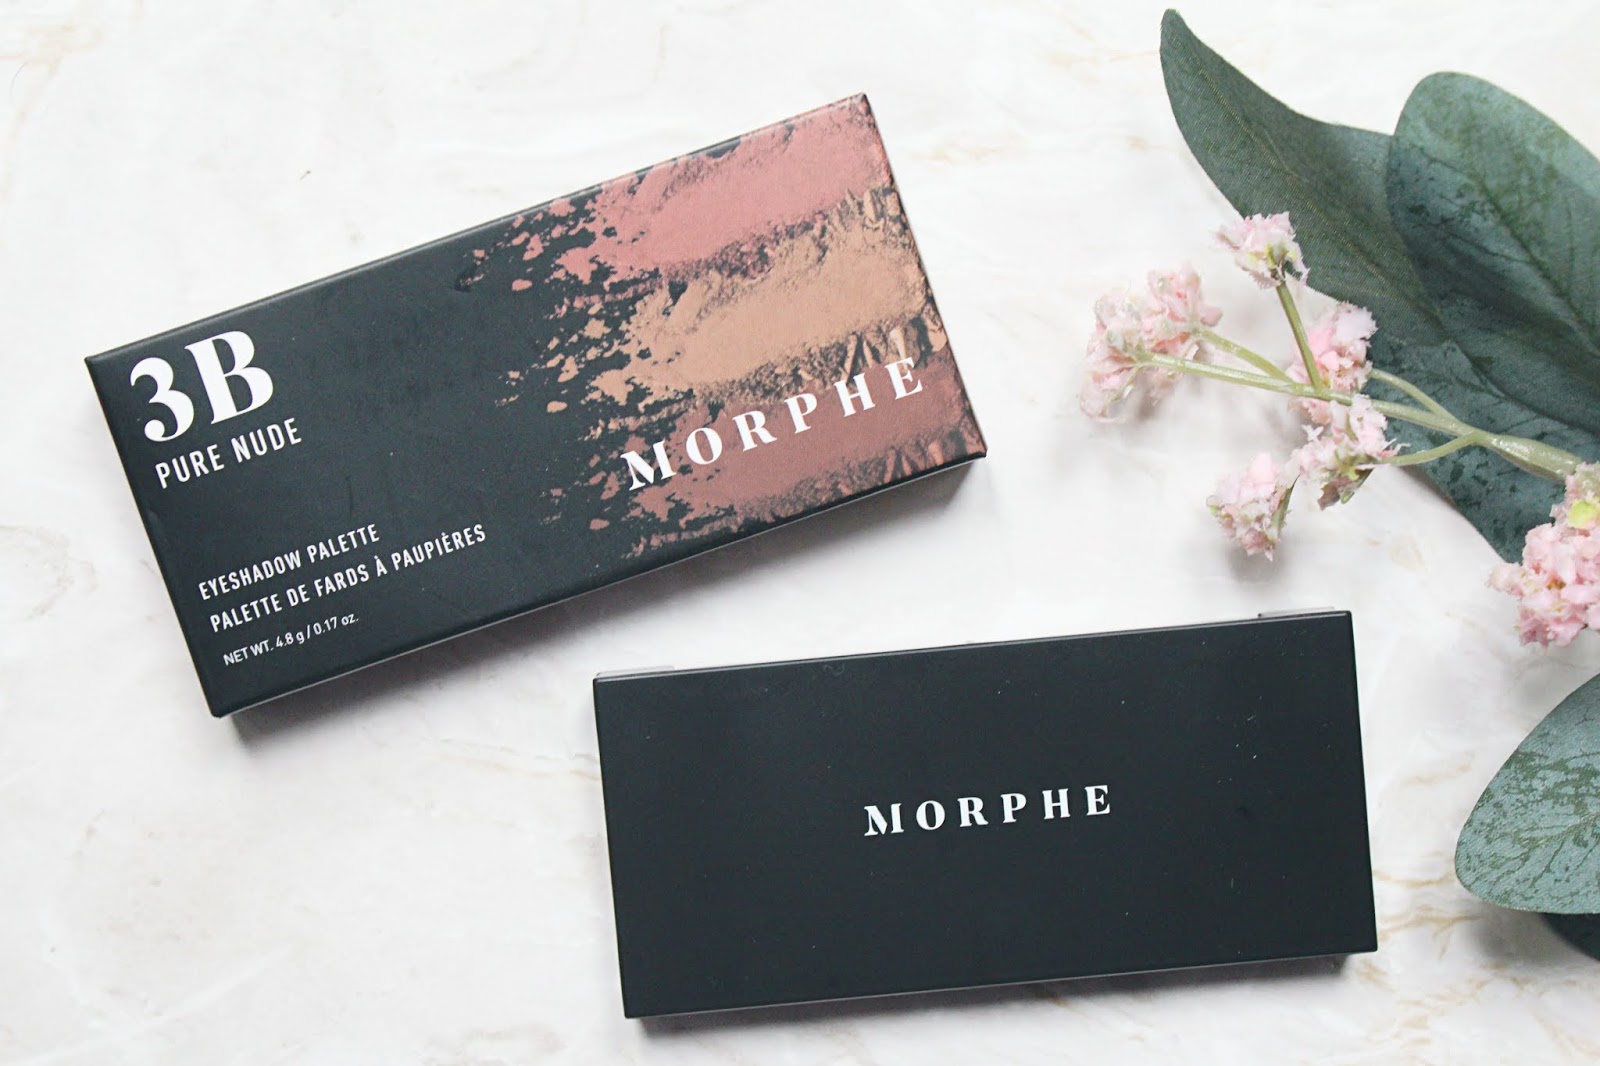 Morphe 3B Pure Nude Palette Review (+ Swatches) 